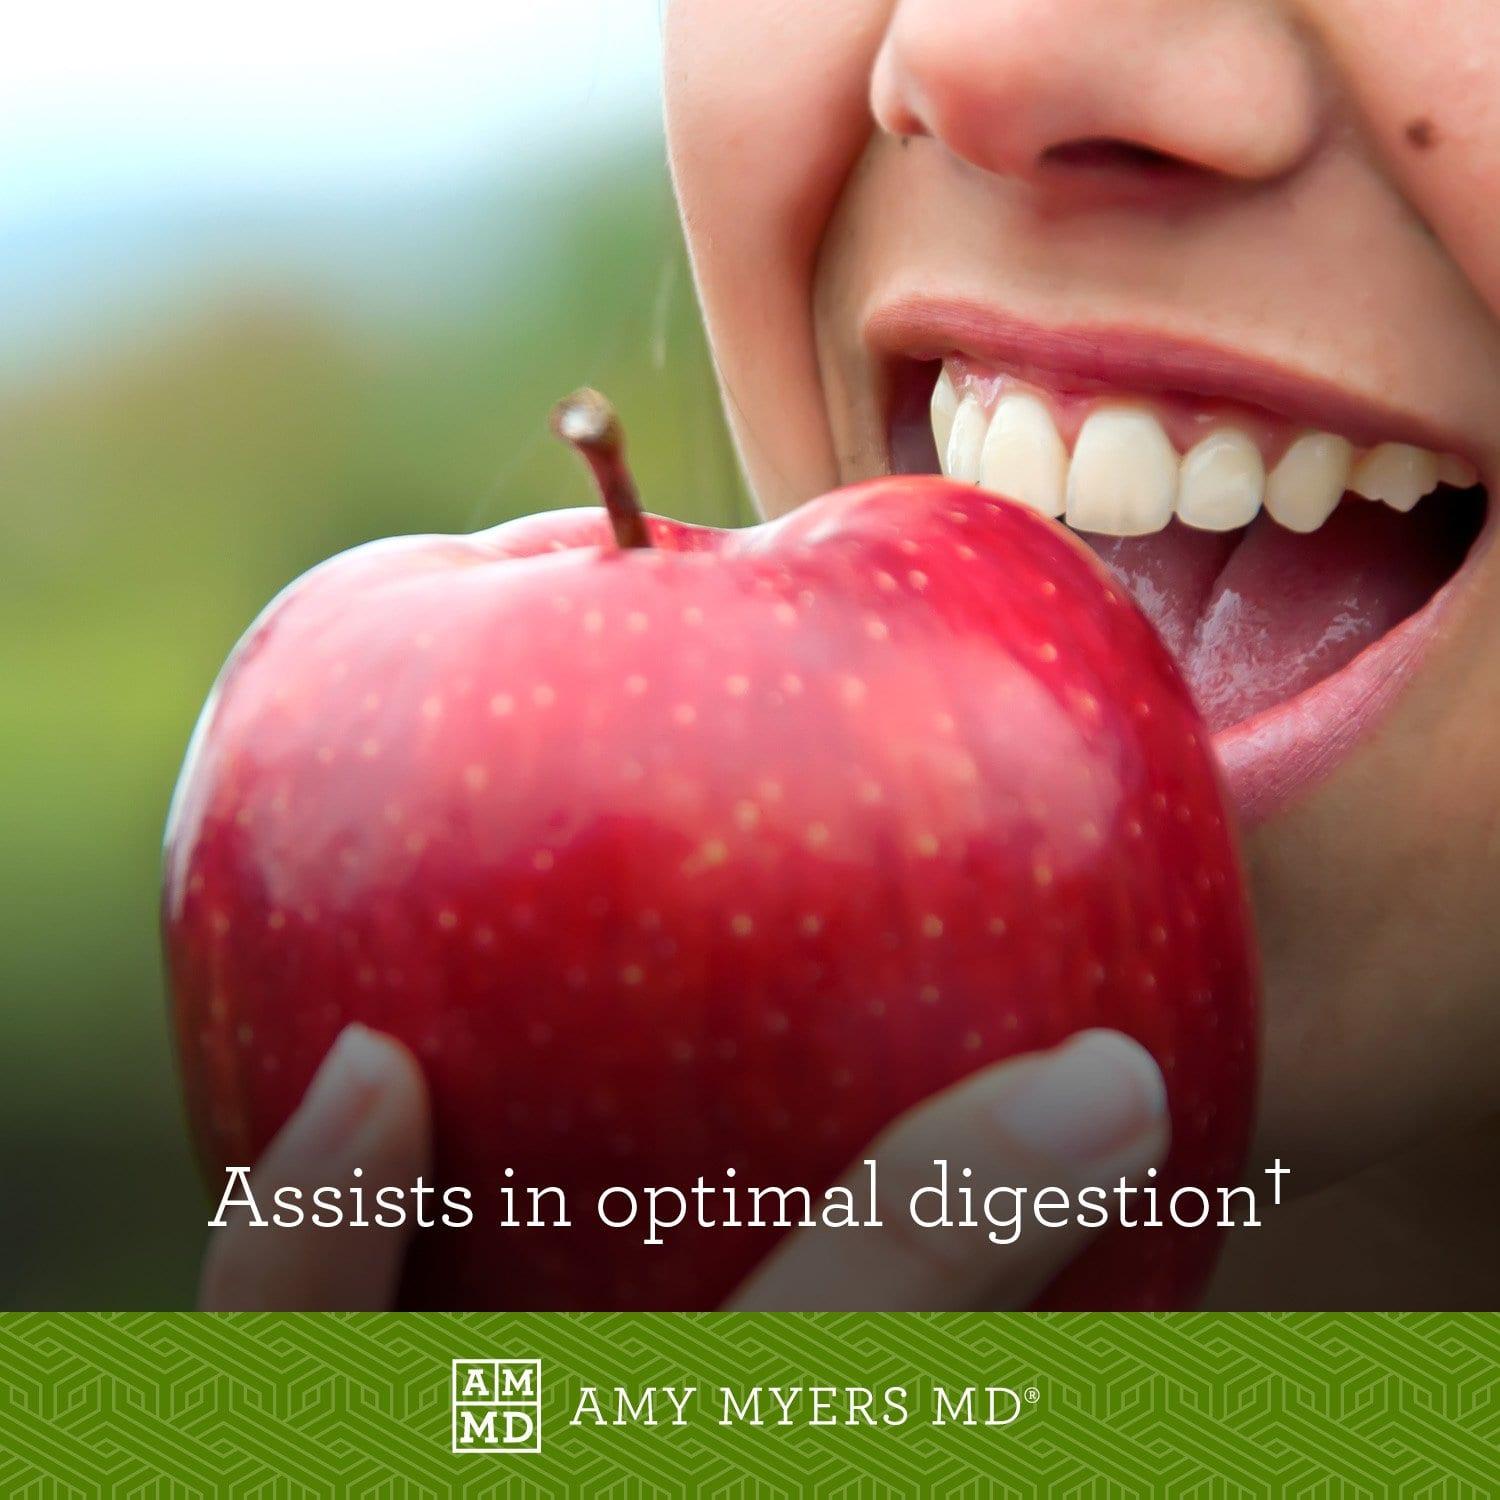 Girl eating apple - Betaine Hydrochloride (HCL) assists in optimal digestion - Amy Myers MD®